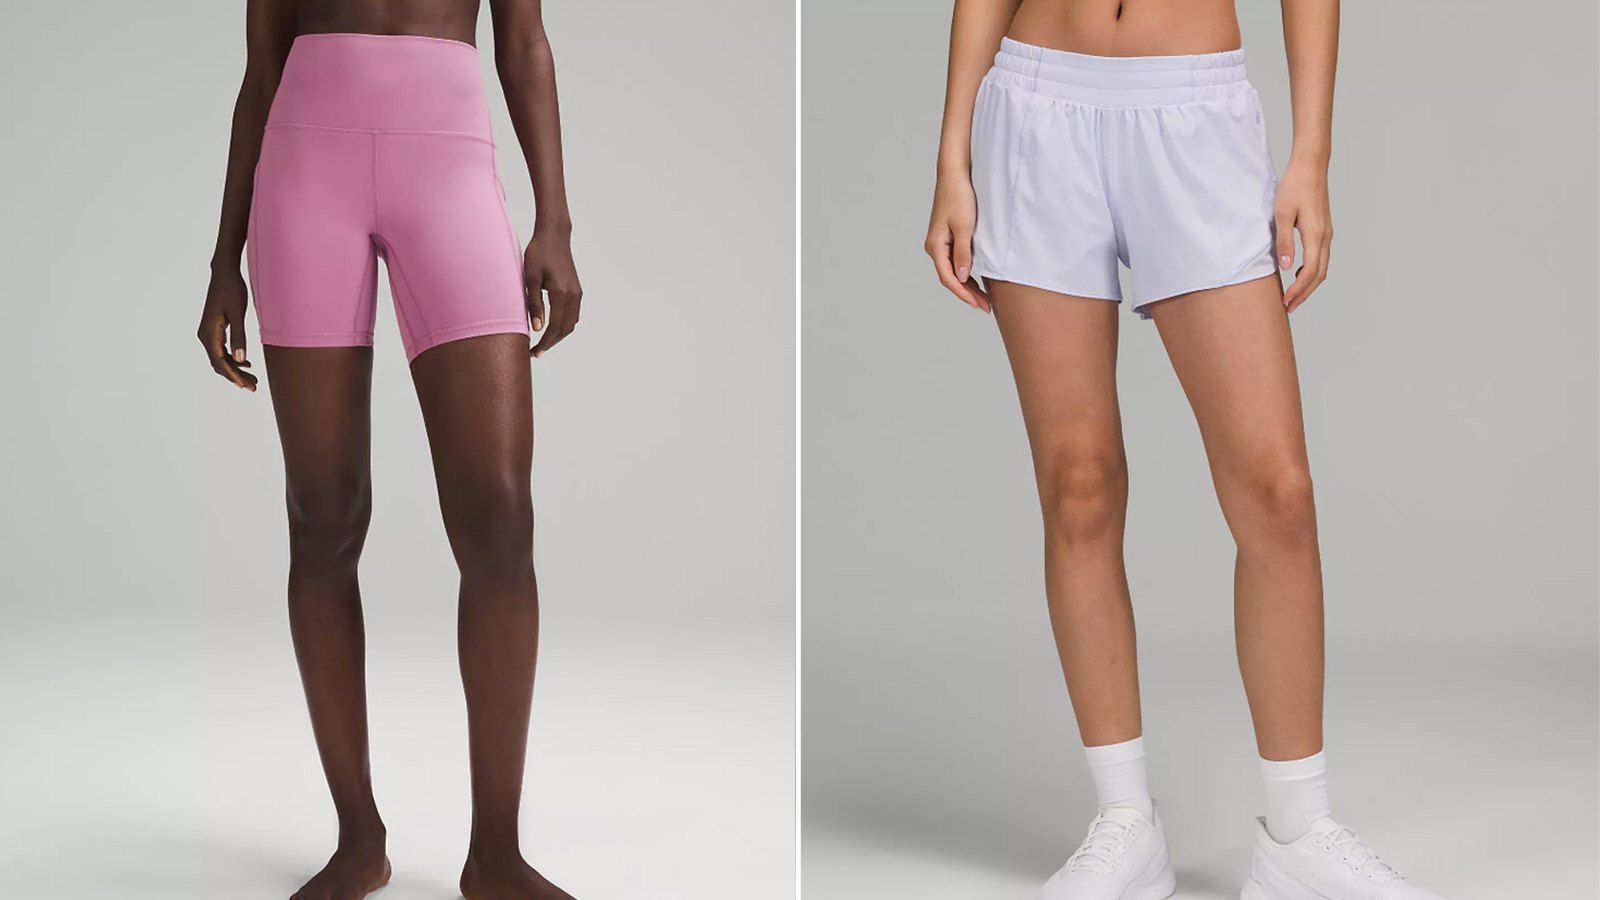 lululemon Shorts: Our Absolute Favorites for Summer